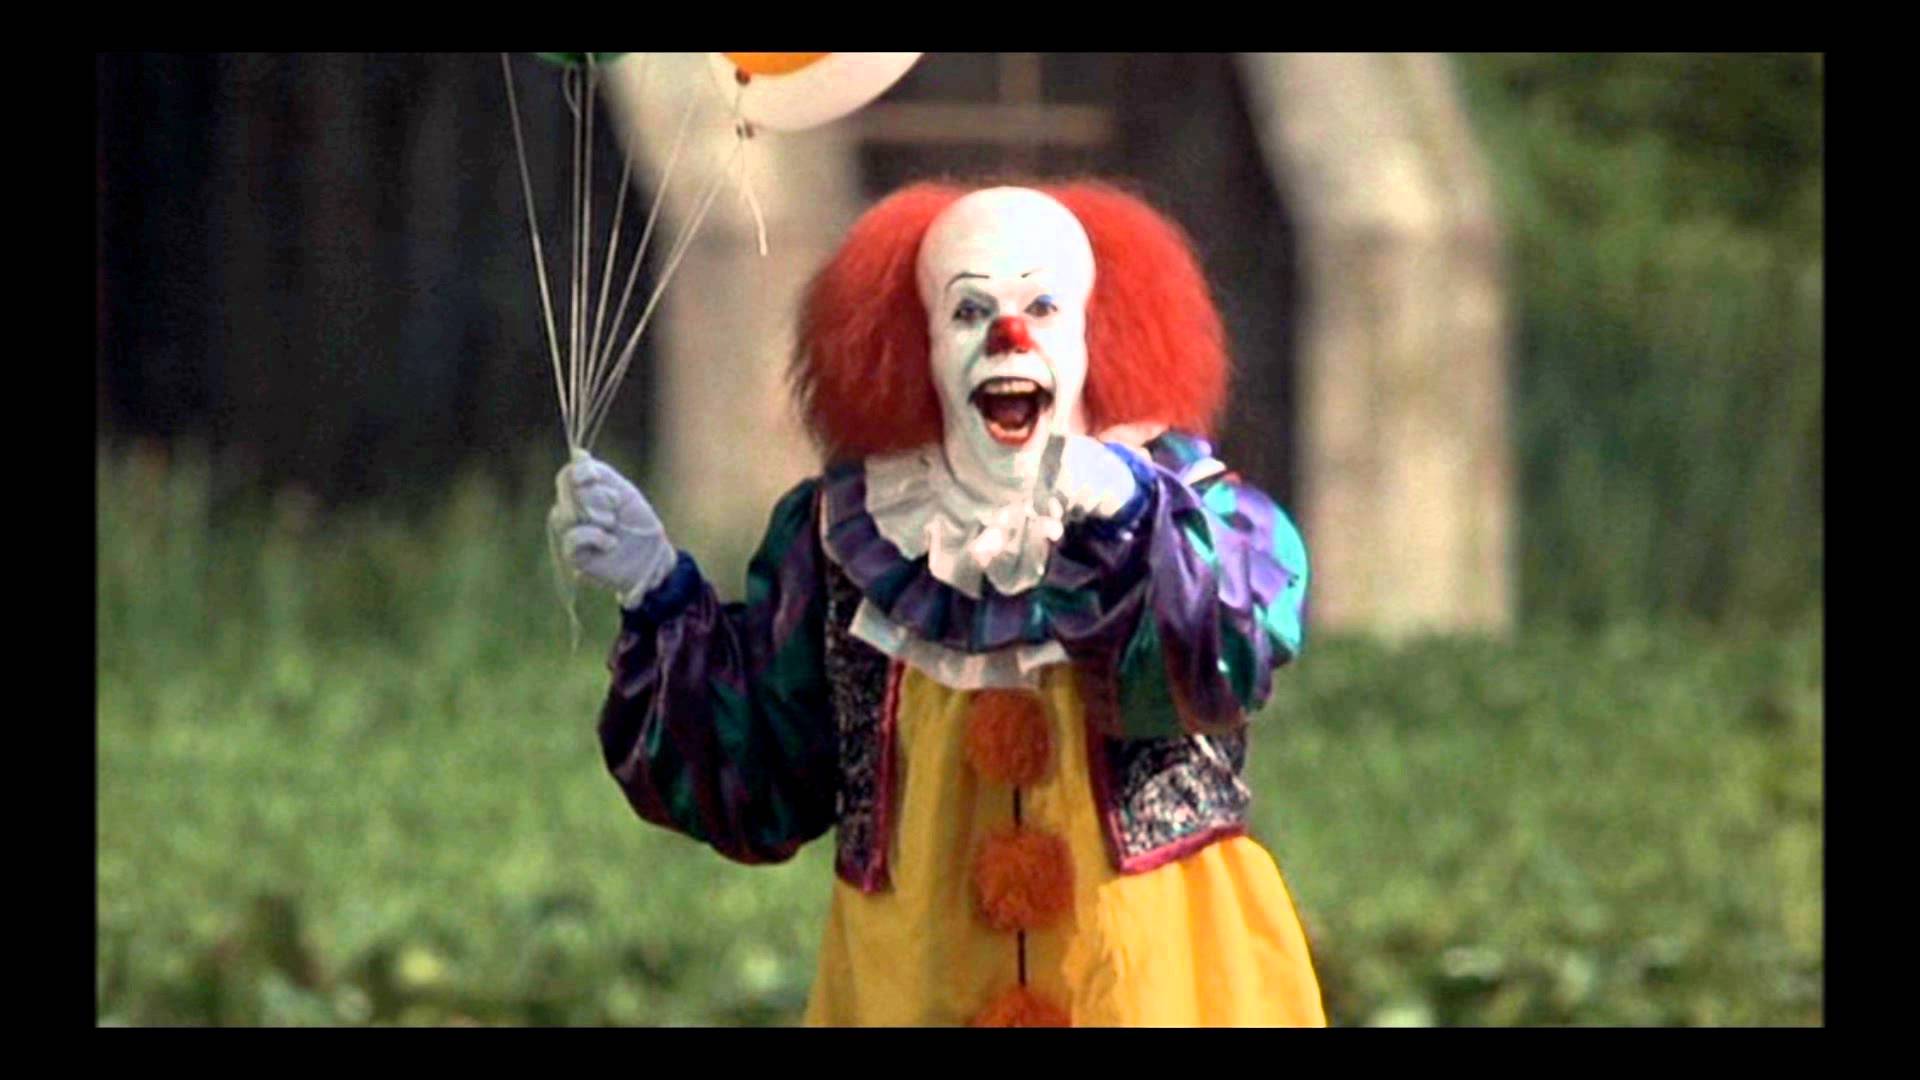 Pennywise The Dancing Clown Has Been Cast For the It Remake